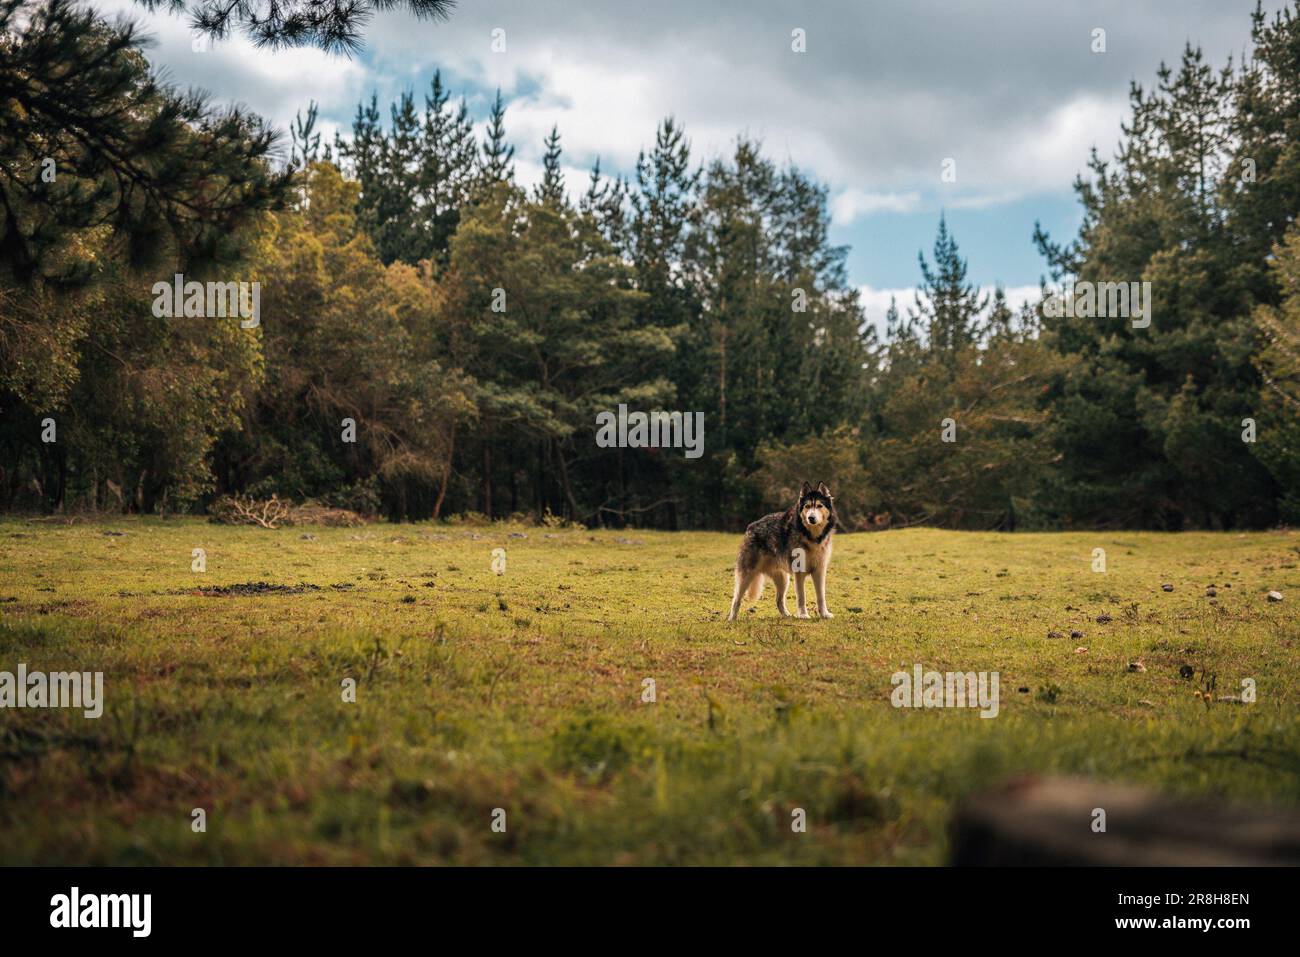 A Mackenzie River husky standing in a lush, green grassy field with an abundance of trees Stock Photo